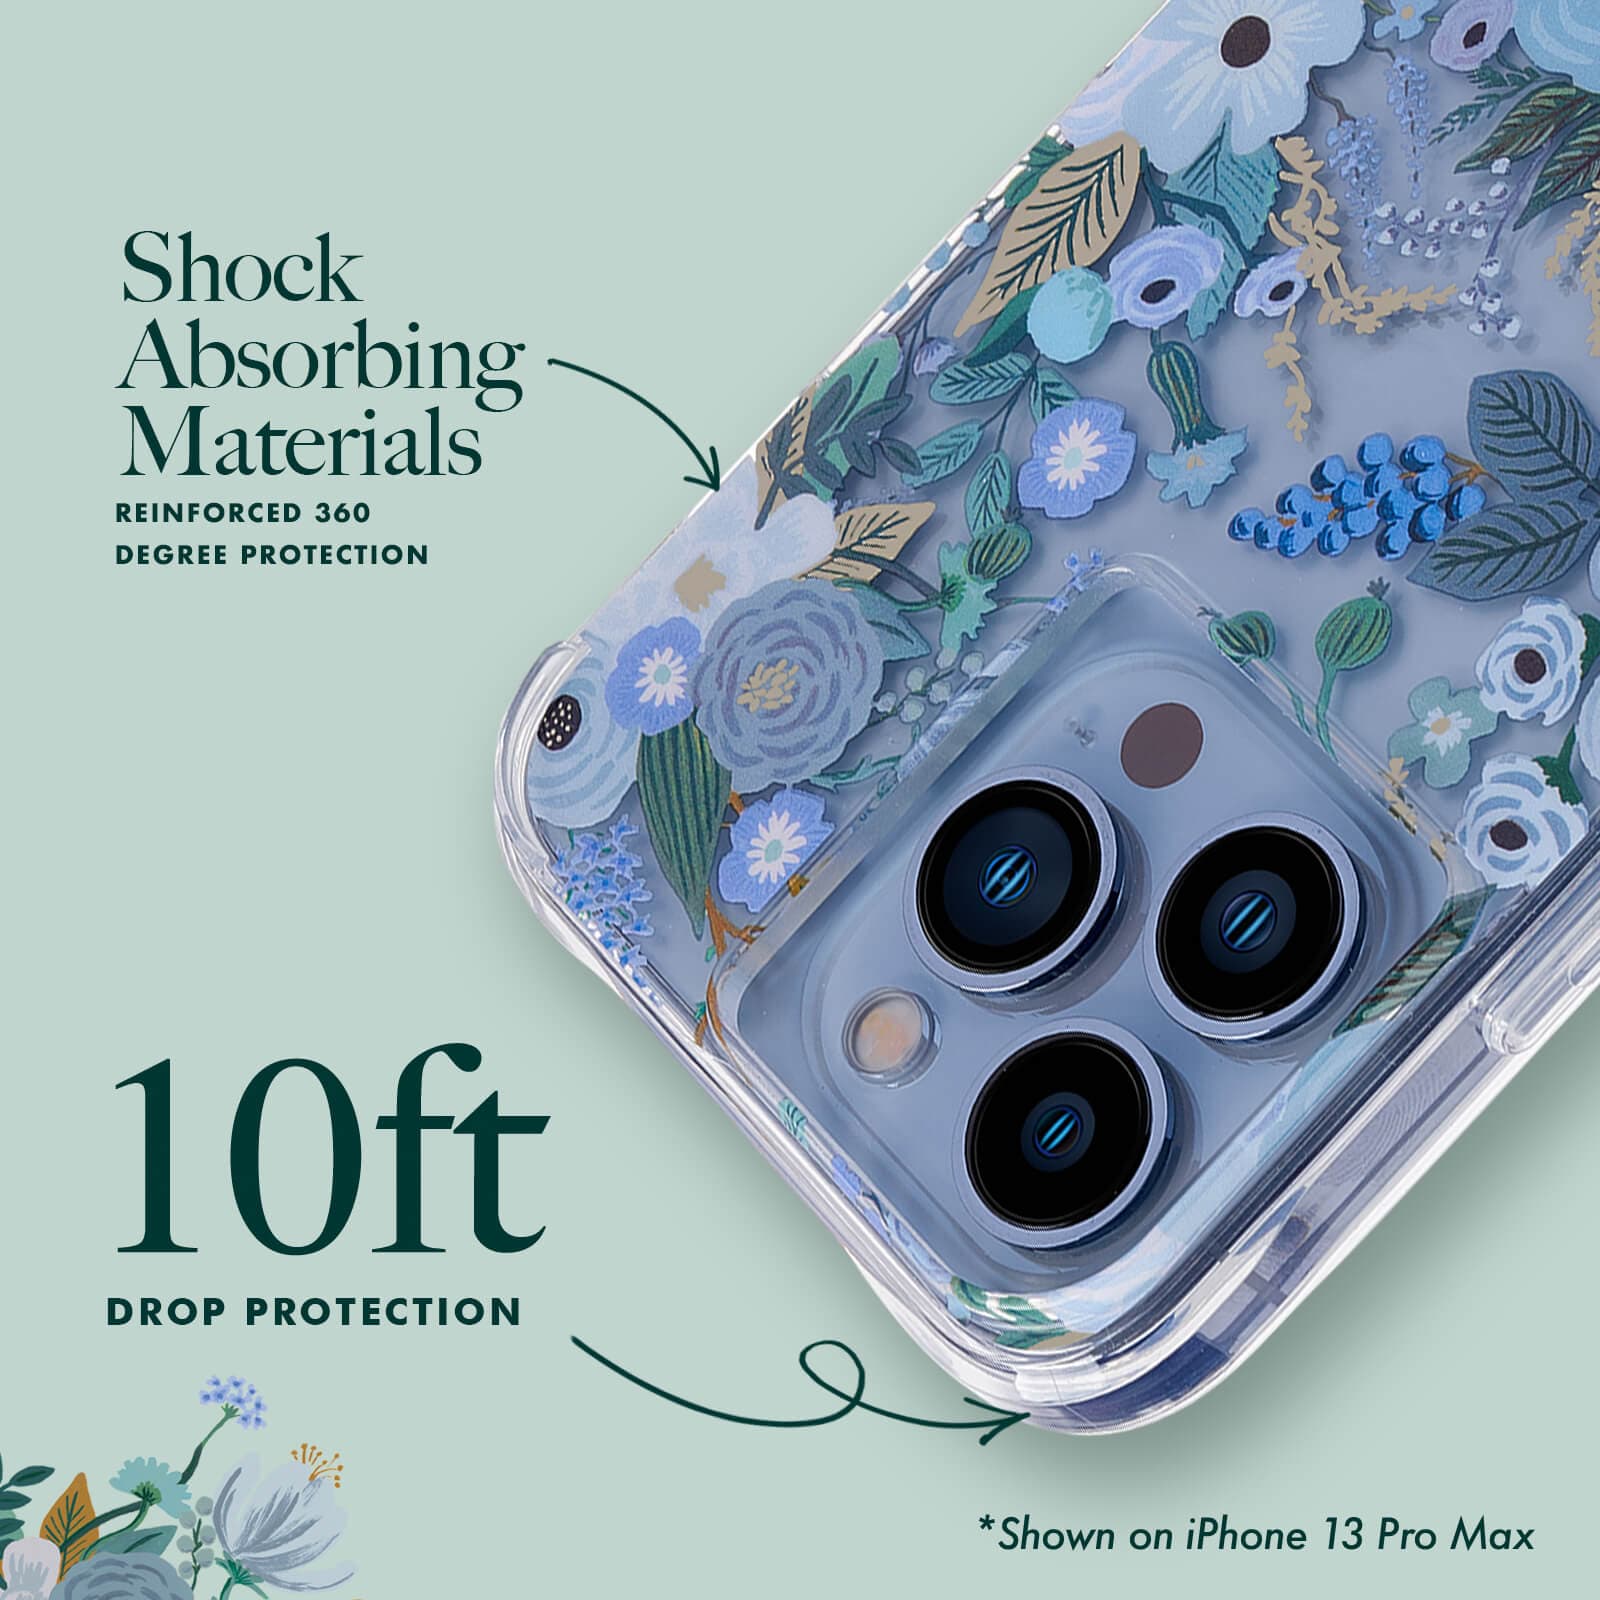 Shock absorbing materials reinforced 360 degree protection. 10ft drop protection. Shown on iPhone 13 Pro Max. color::Garden Party Blue